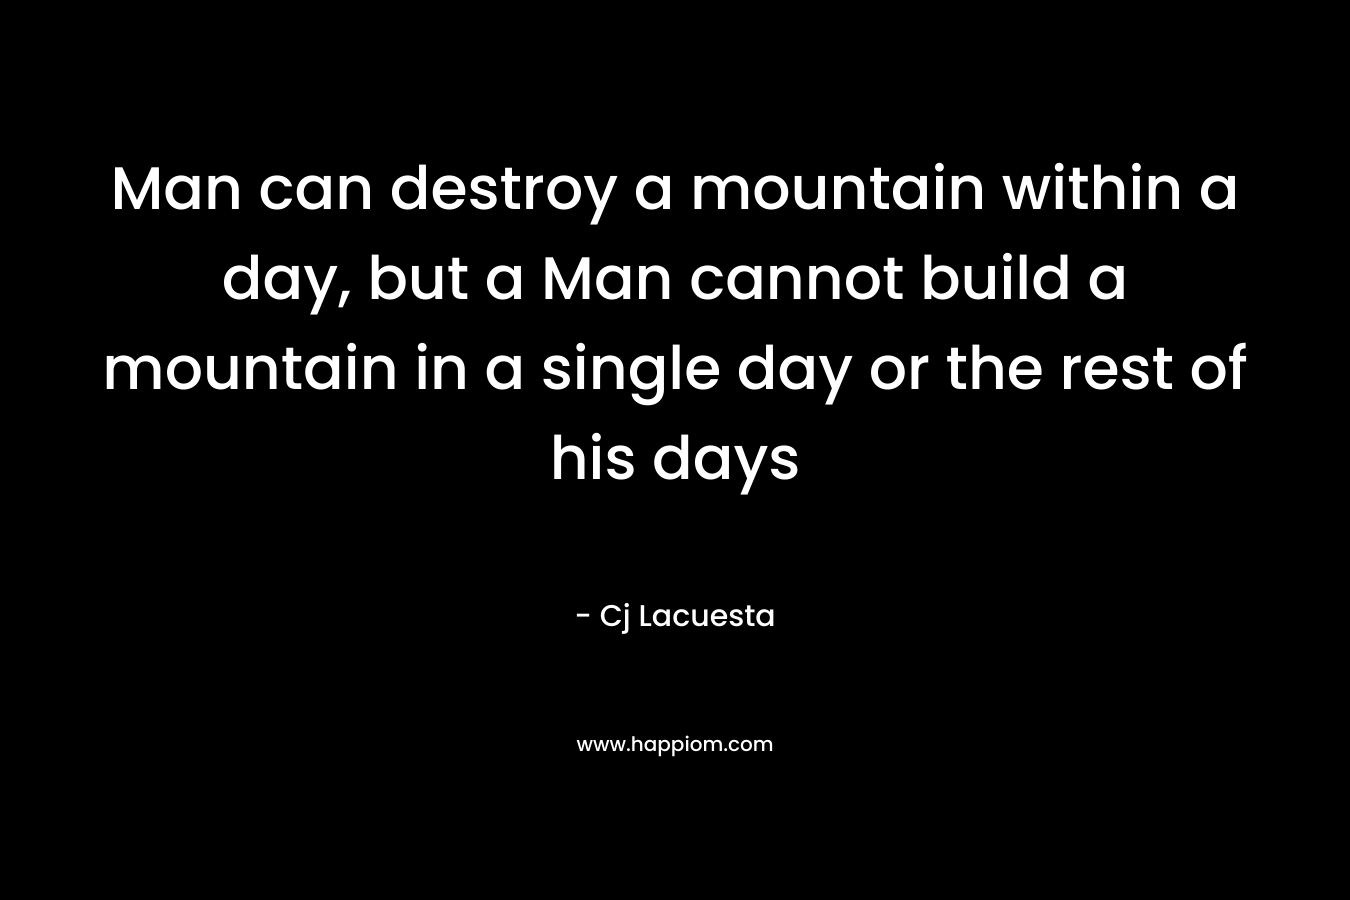 Man can destroy a mountain within a day, but a Man cannot build a mountain in a single day or the rest of his days